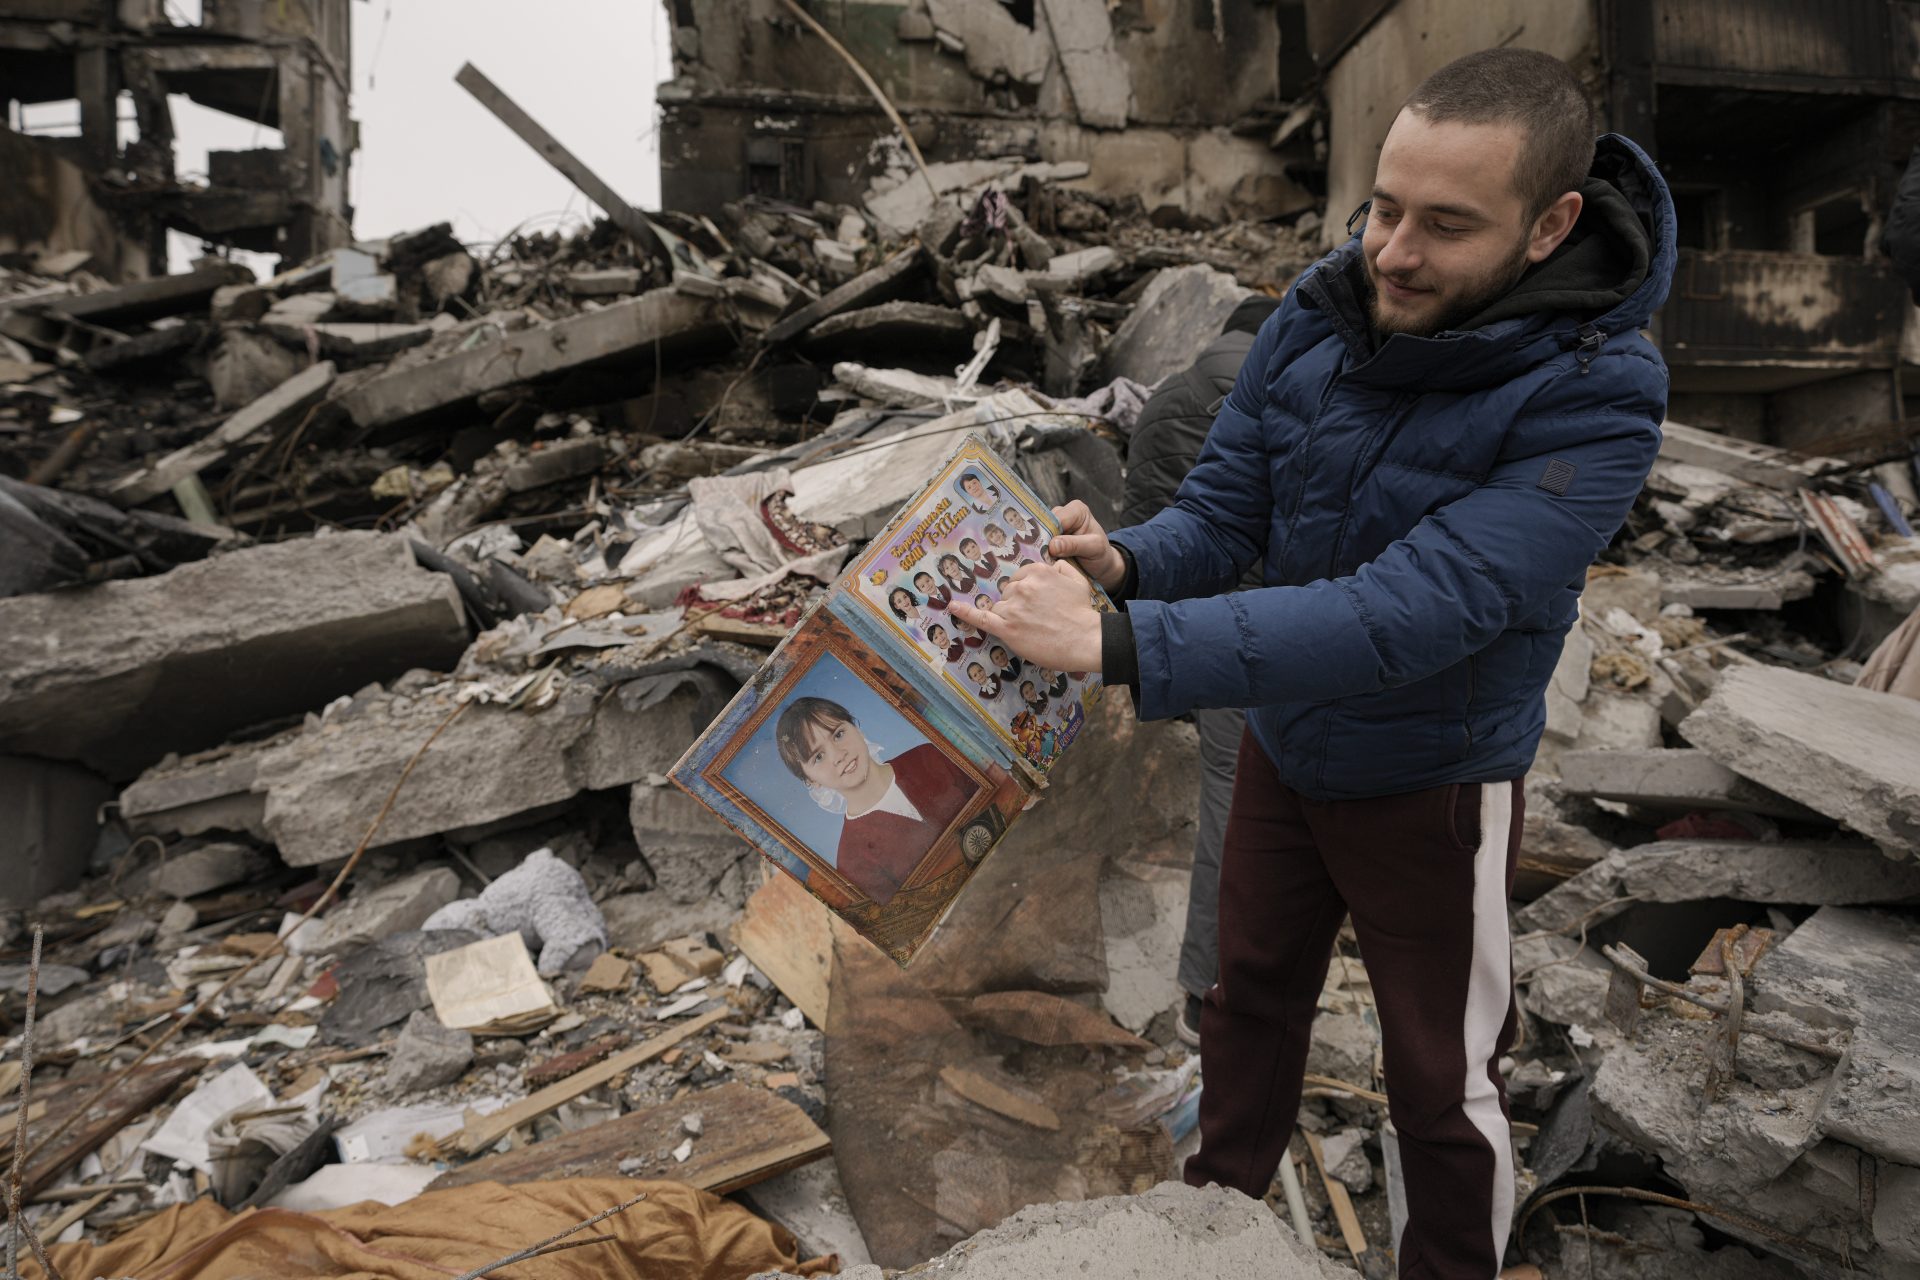 Dmitriy Evtushkov, 25, points to his picture in a primary school album retrieved from the rubble of an apartment building destroyed during fighting between Ukrainian and Russian forces in Borodyanka, Ukraine, Tuesday, April 5, 2022.